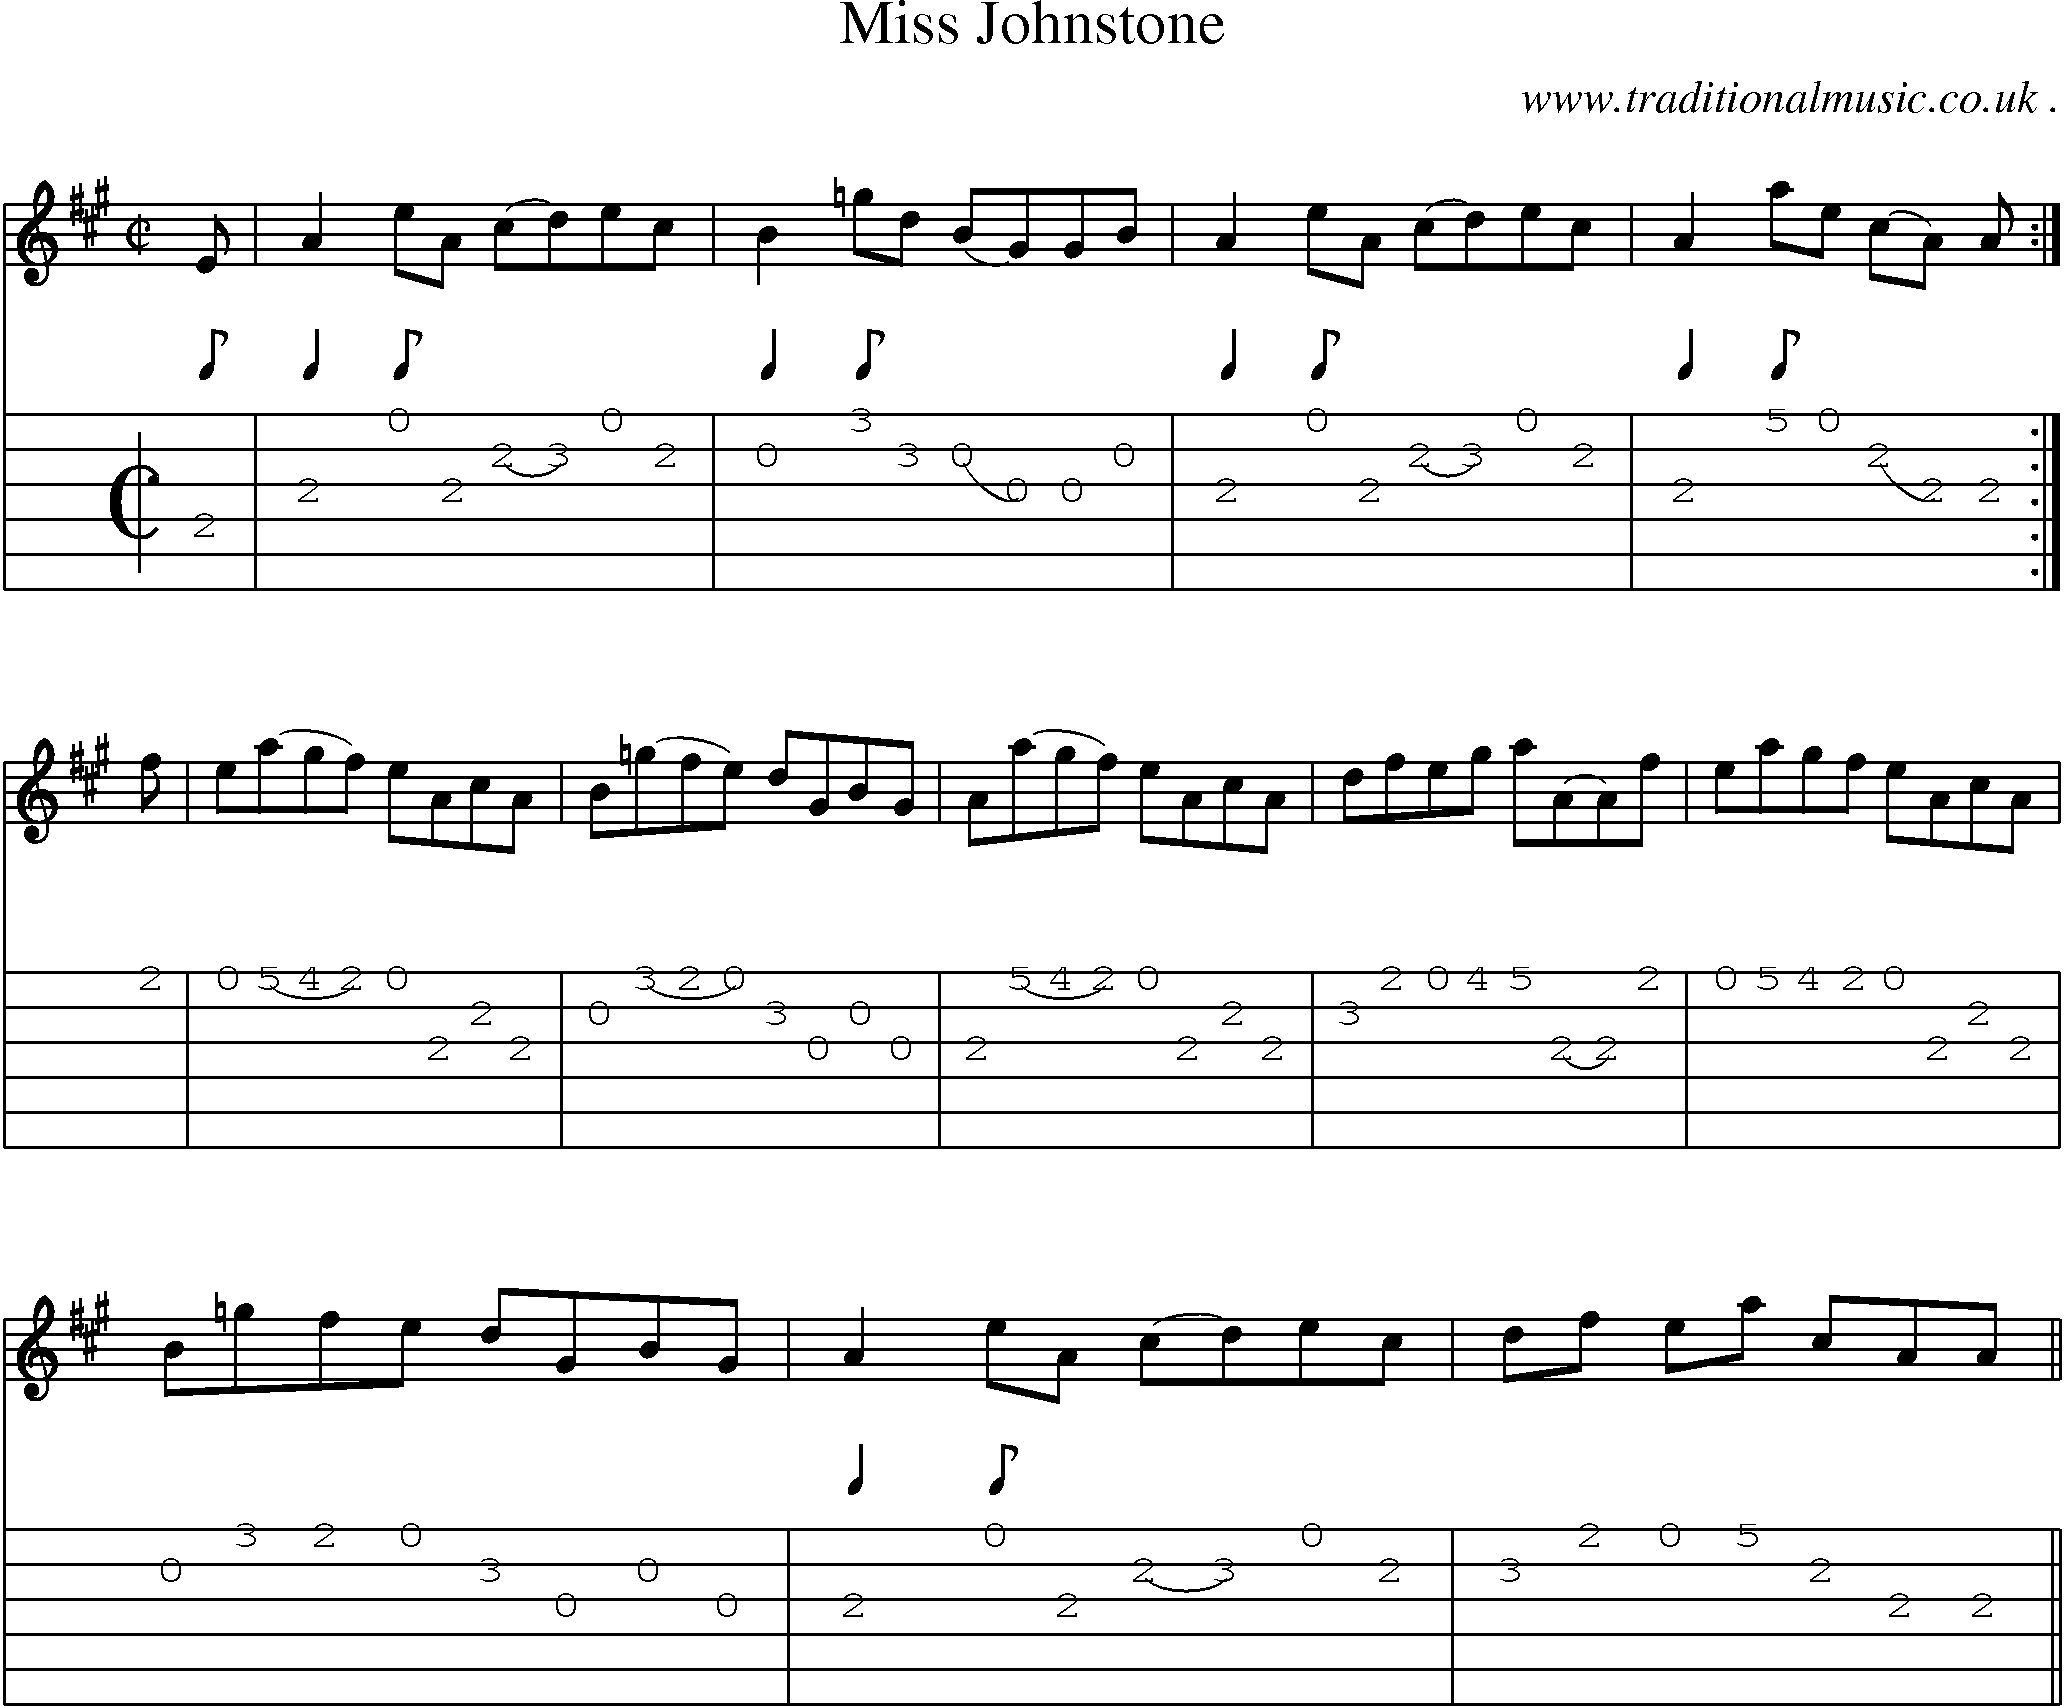 Sheet-music  score, Chords and Guitar Tabs for Miss Johnstone